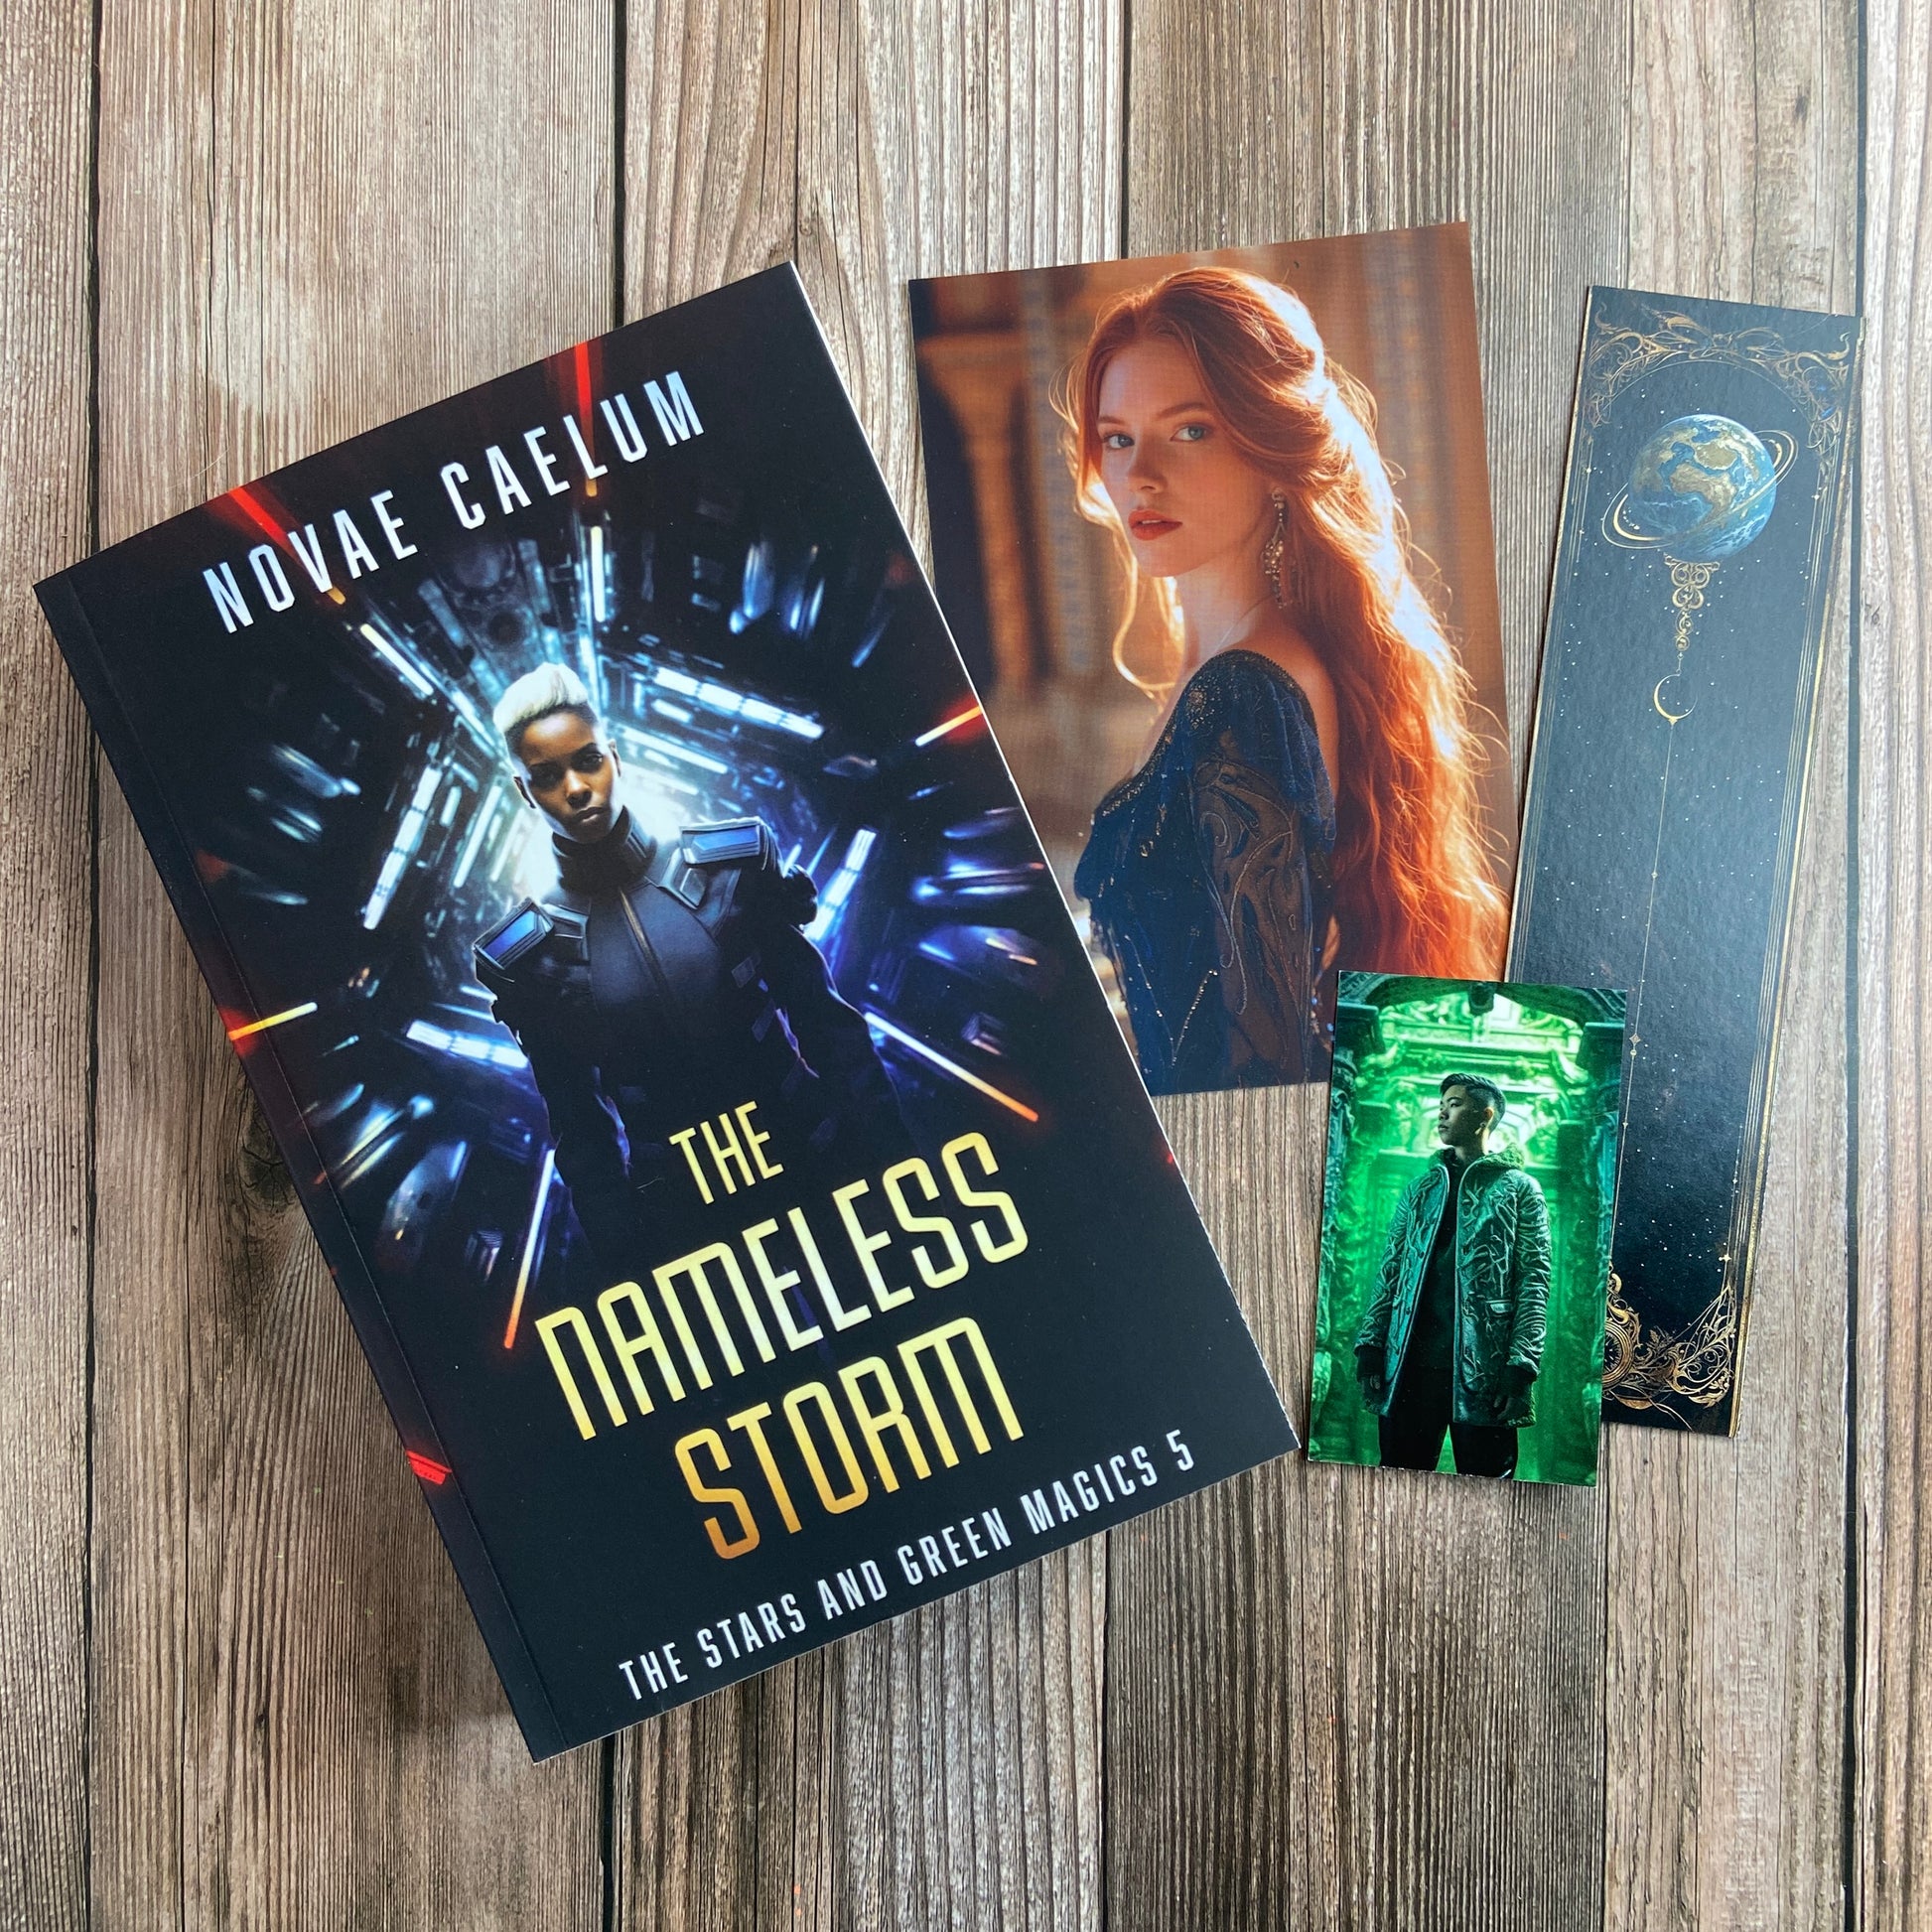 A sci-fi novel titled "SIGNED The Nameless Storm" from the series "Novae Caelum: The Stars and Green Magics", featuring royal siblings and accompanied by character art bookmarks using gender.